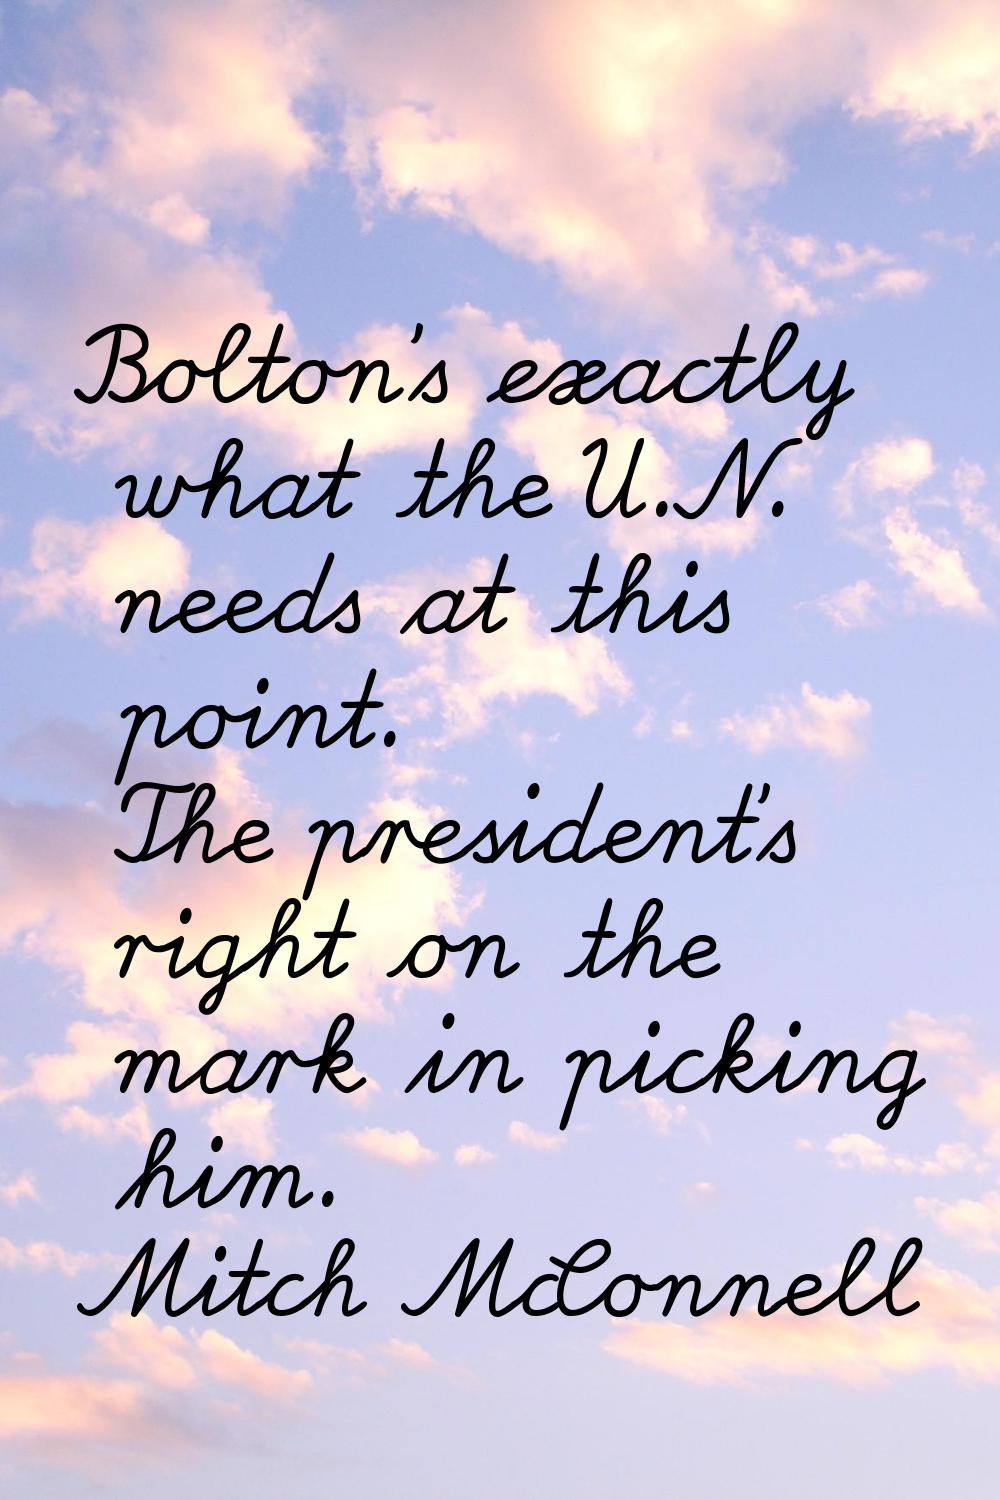 Bolton's exactly what the U.N. needs at this point. The president's right on the mark in picking hi